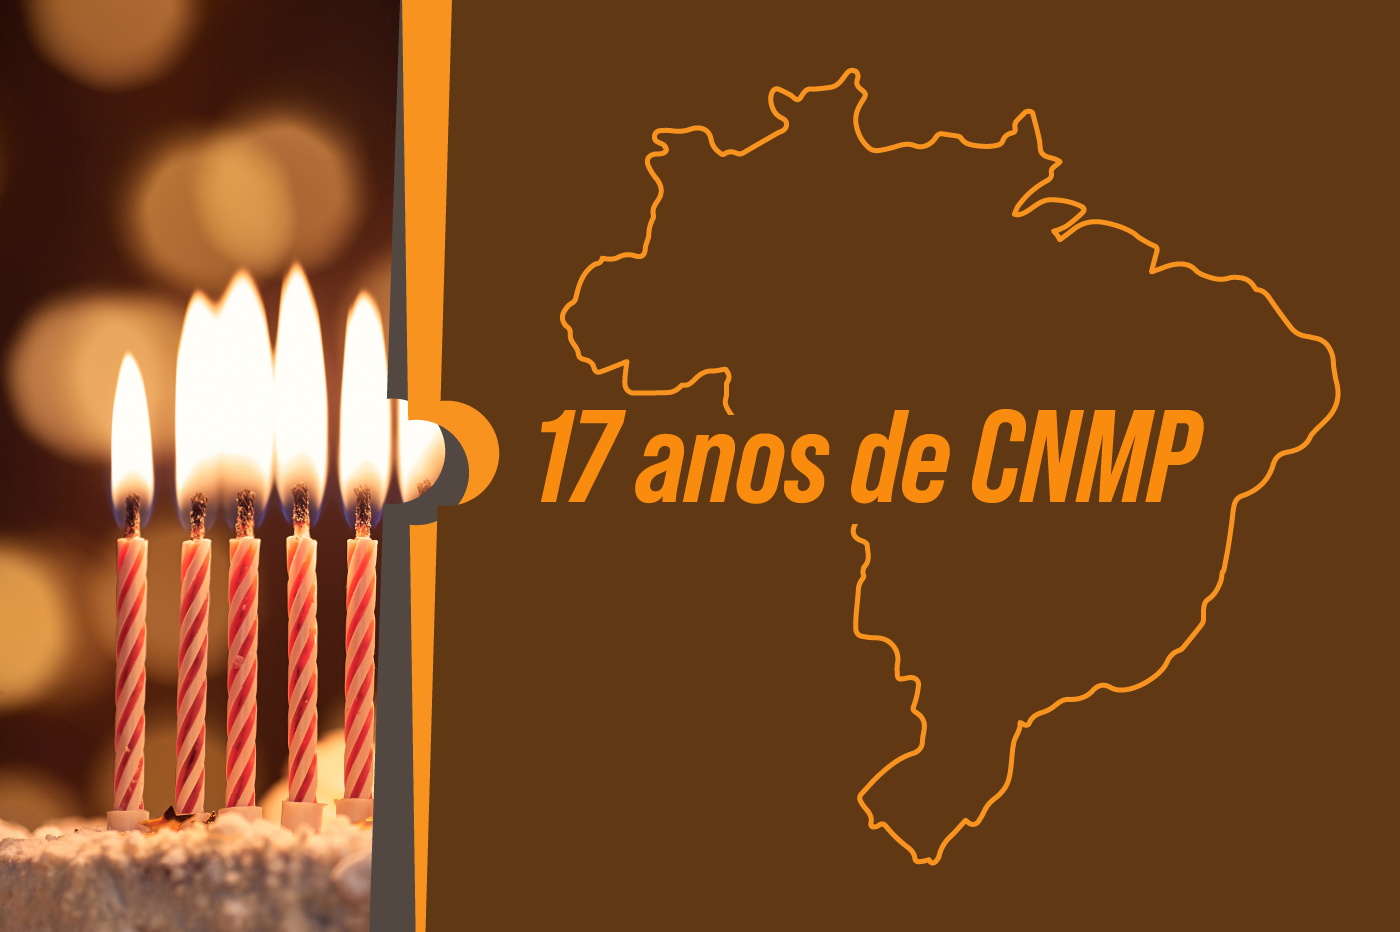 cnmp_17_anos.png - 489,92 kB